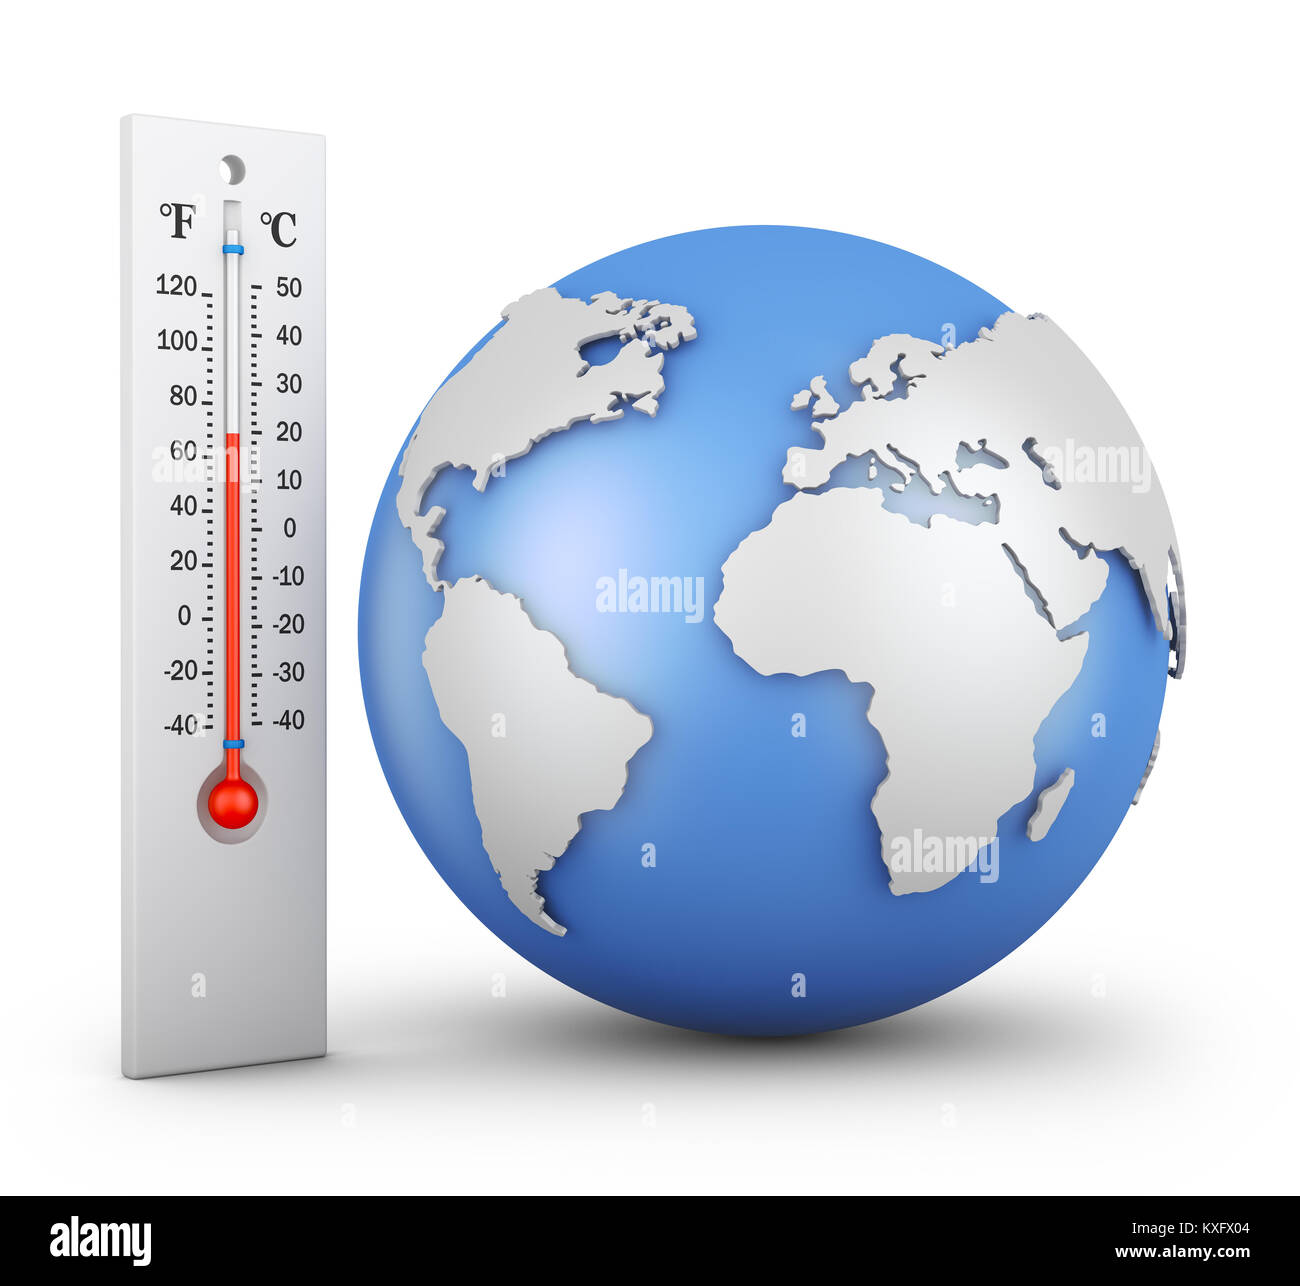 10,809 Thermometer Global Warming Images, Stock Photos, 3D objects